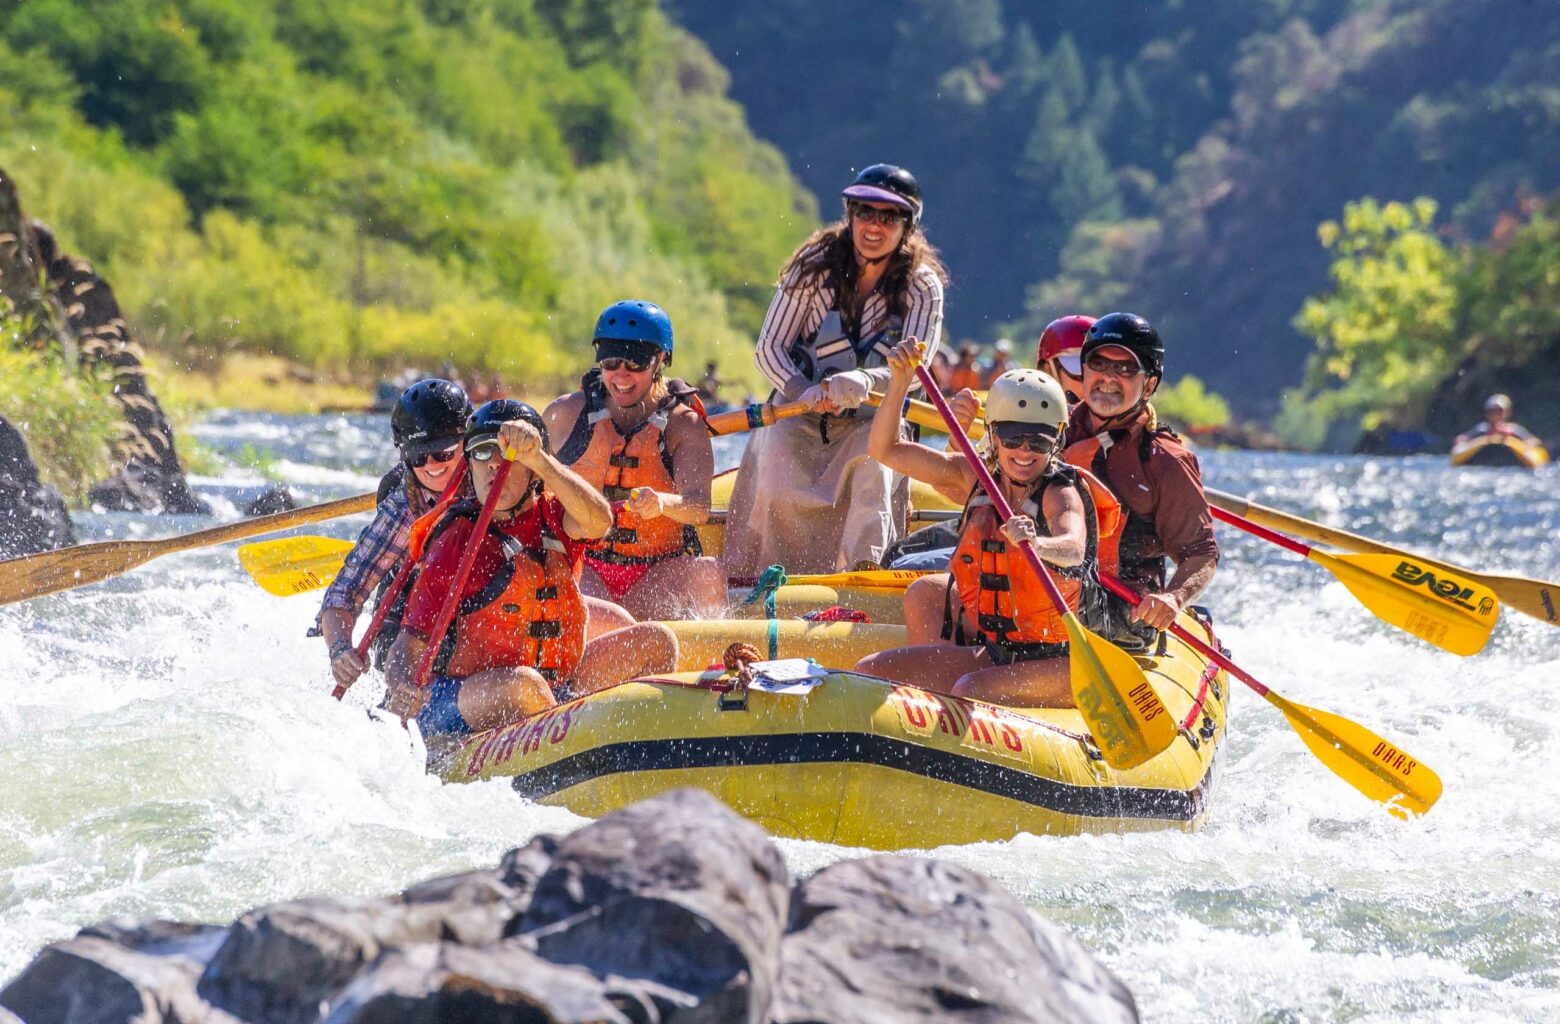 A group of people white water rafting.